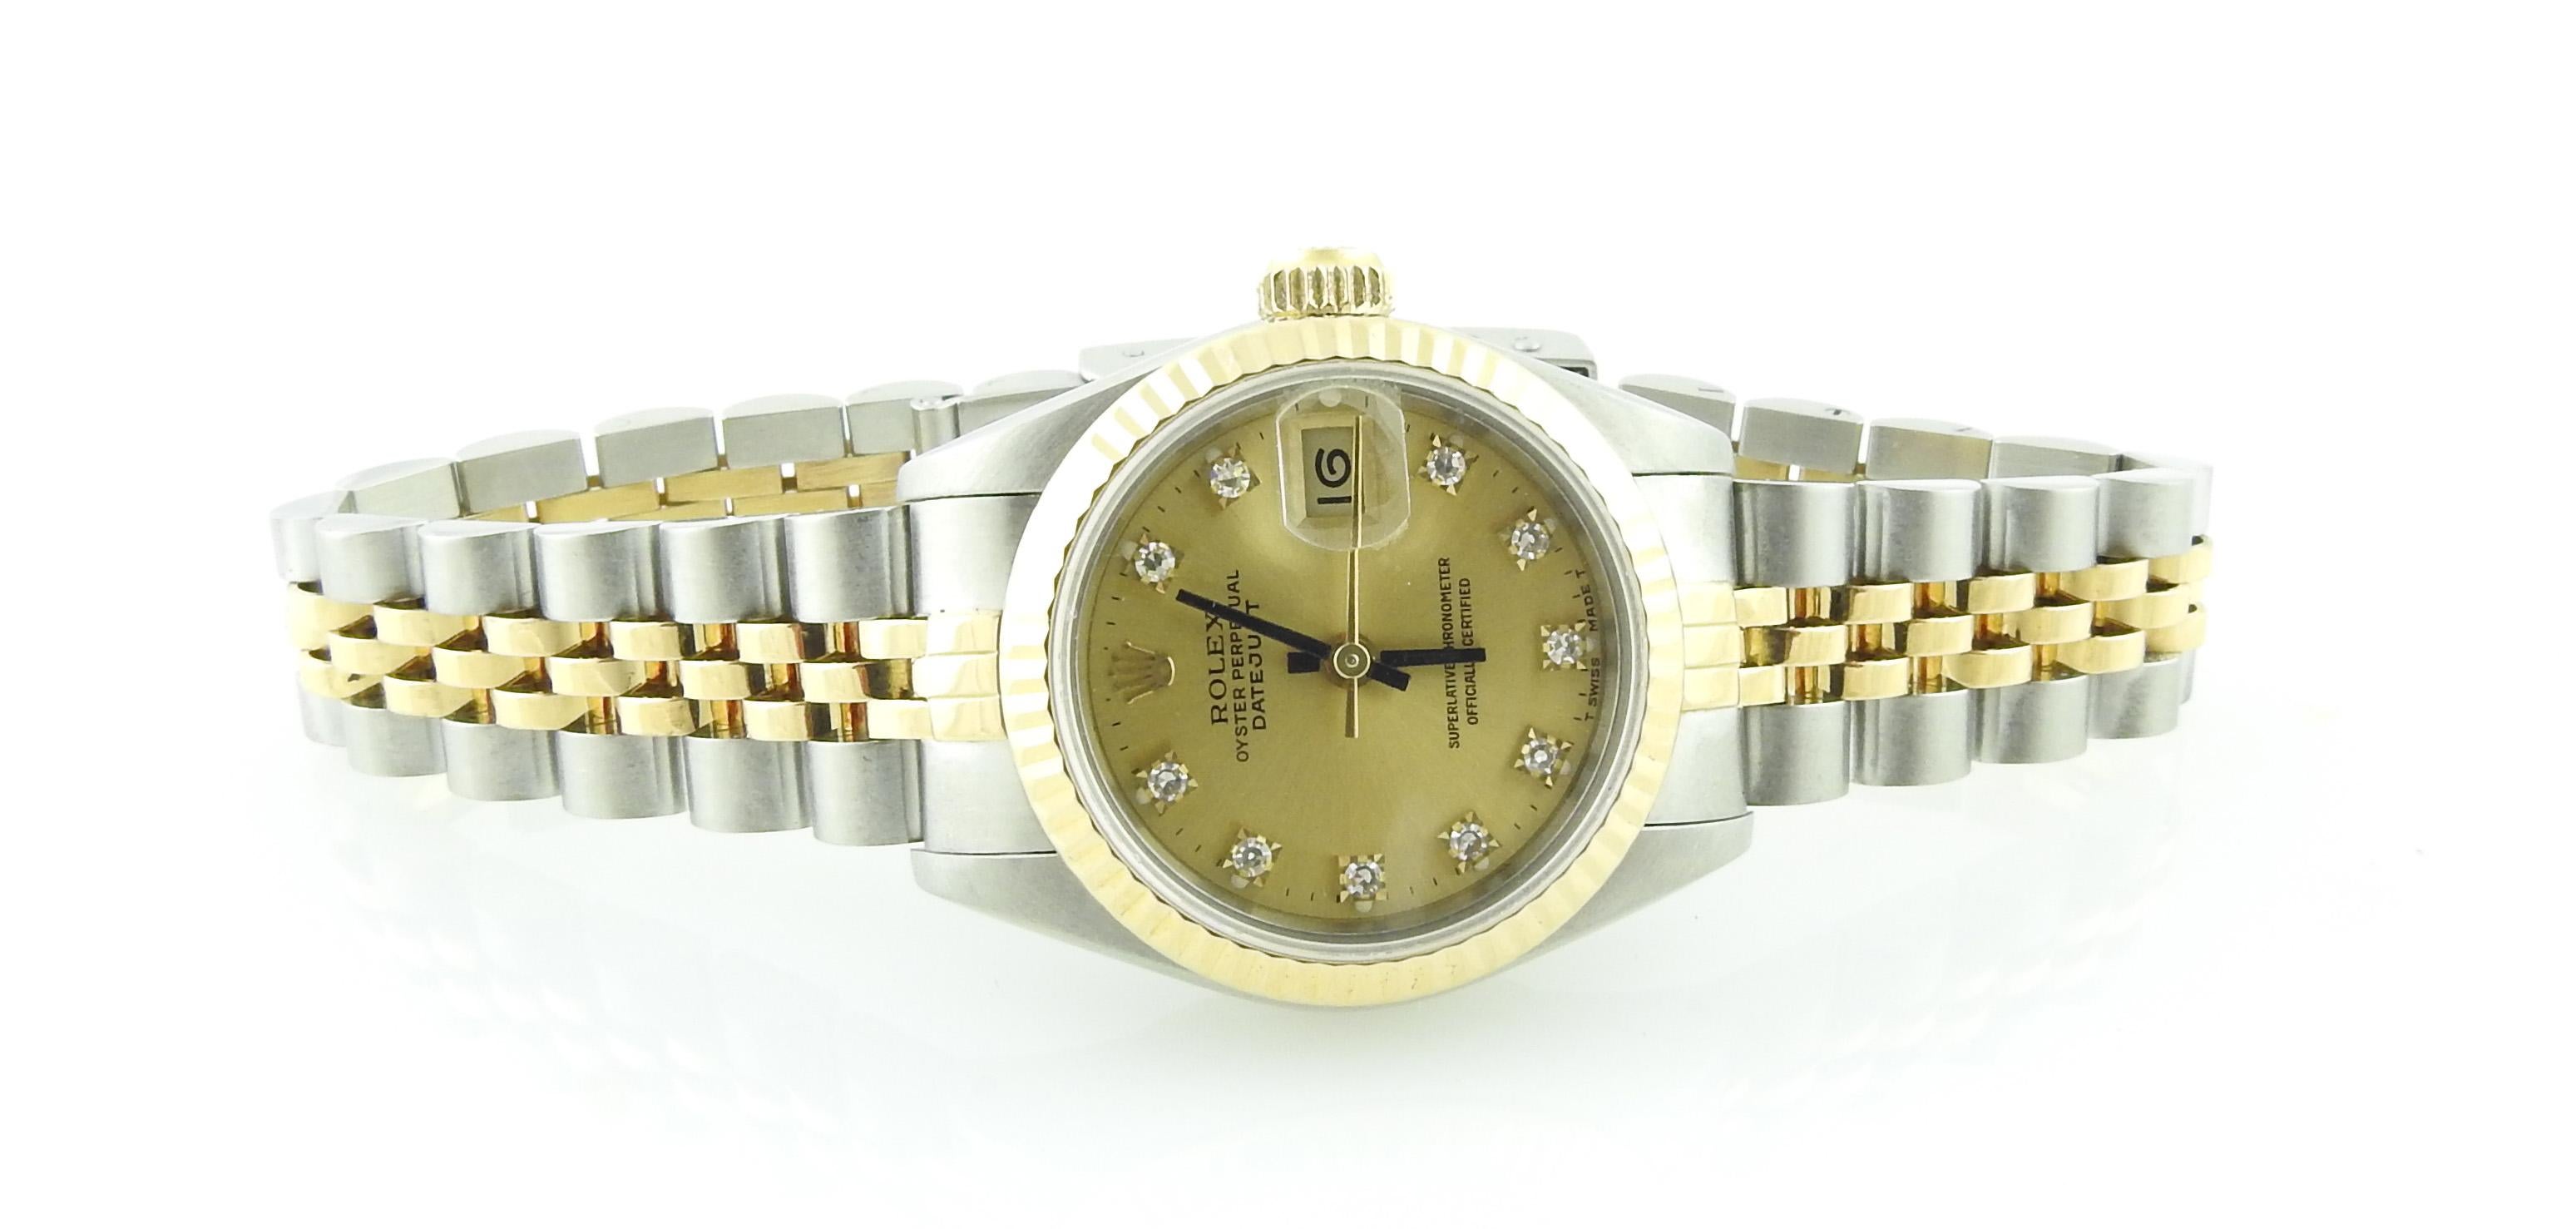 1988 Rolex Ladies Two Tone Watch

Model: 69173
Serial: R226206

26mm case

Champagne dial with 10 diamond markers

Gold and stainless jubilee band. Some slight stretch as shown in pictures. Fits up to 6 3/4